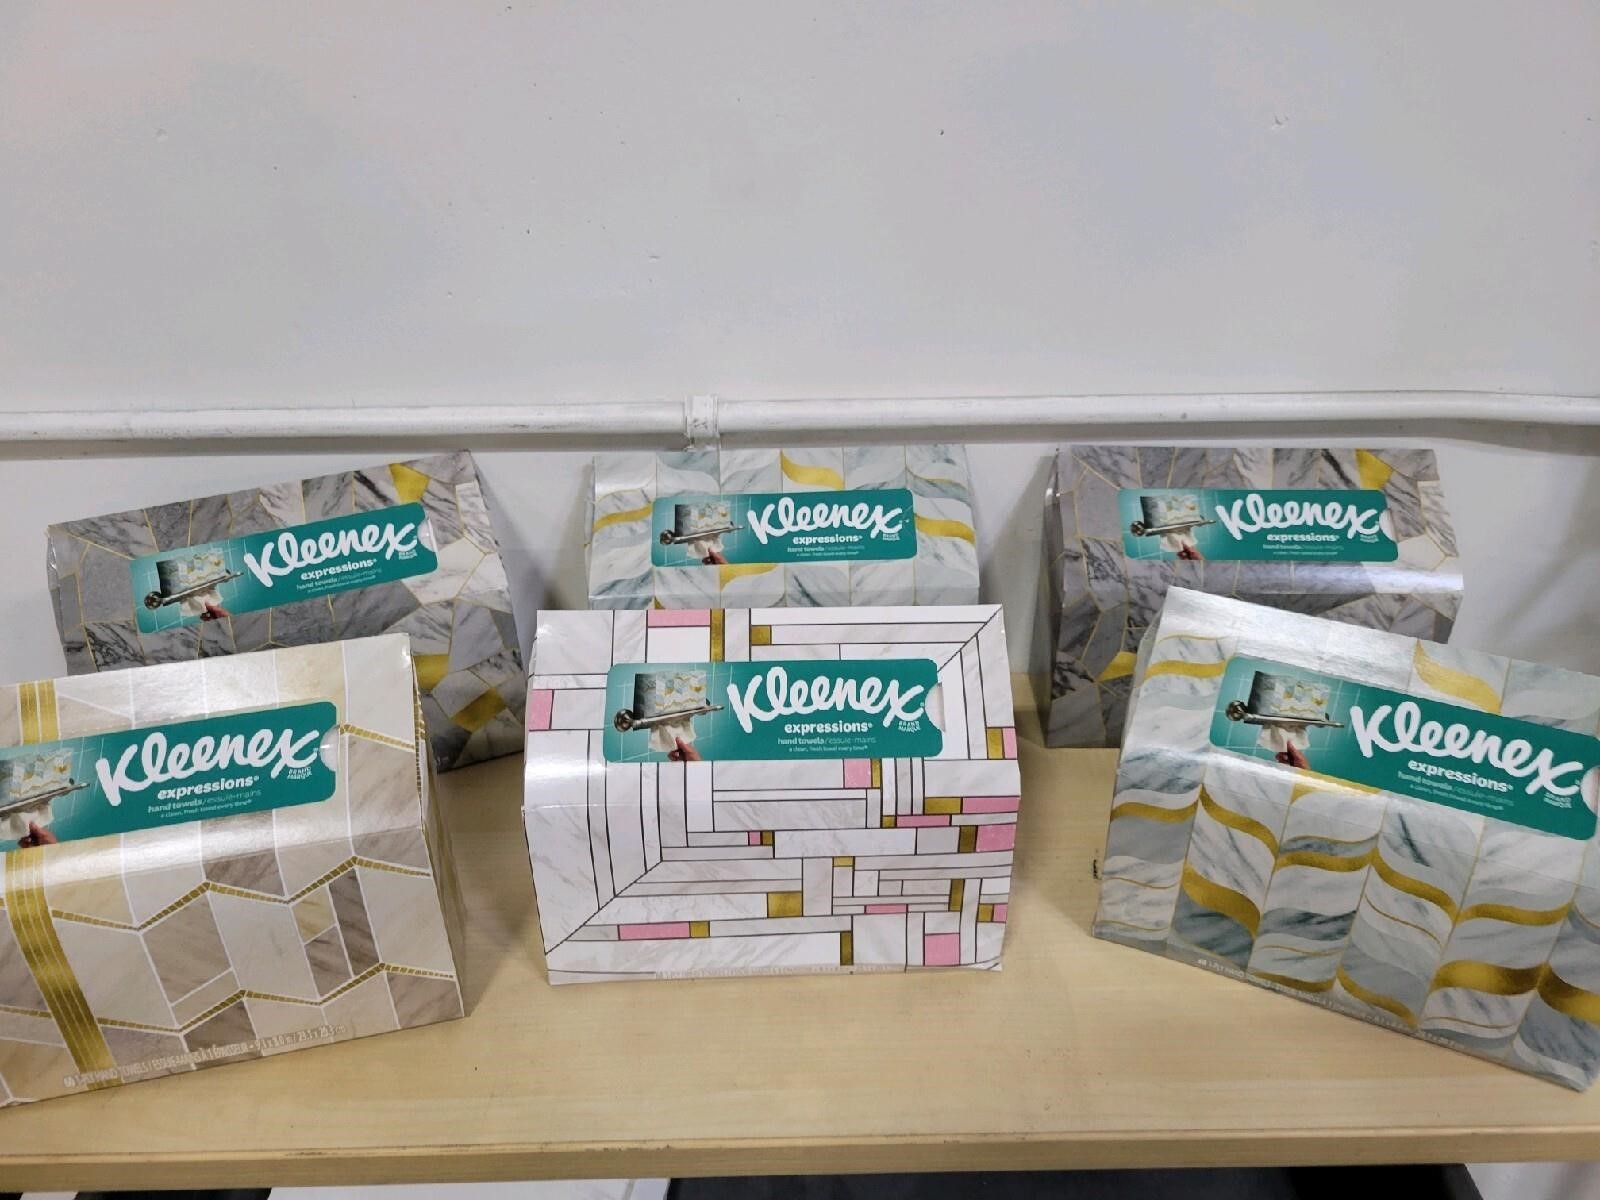 Lot of 6 Boxes of Kleenex Hand Towels